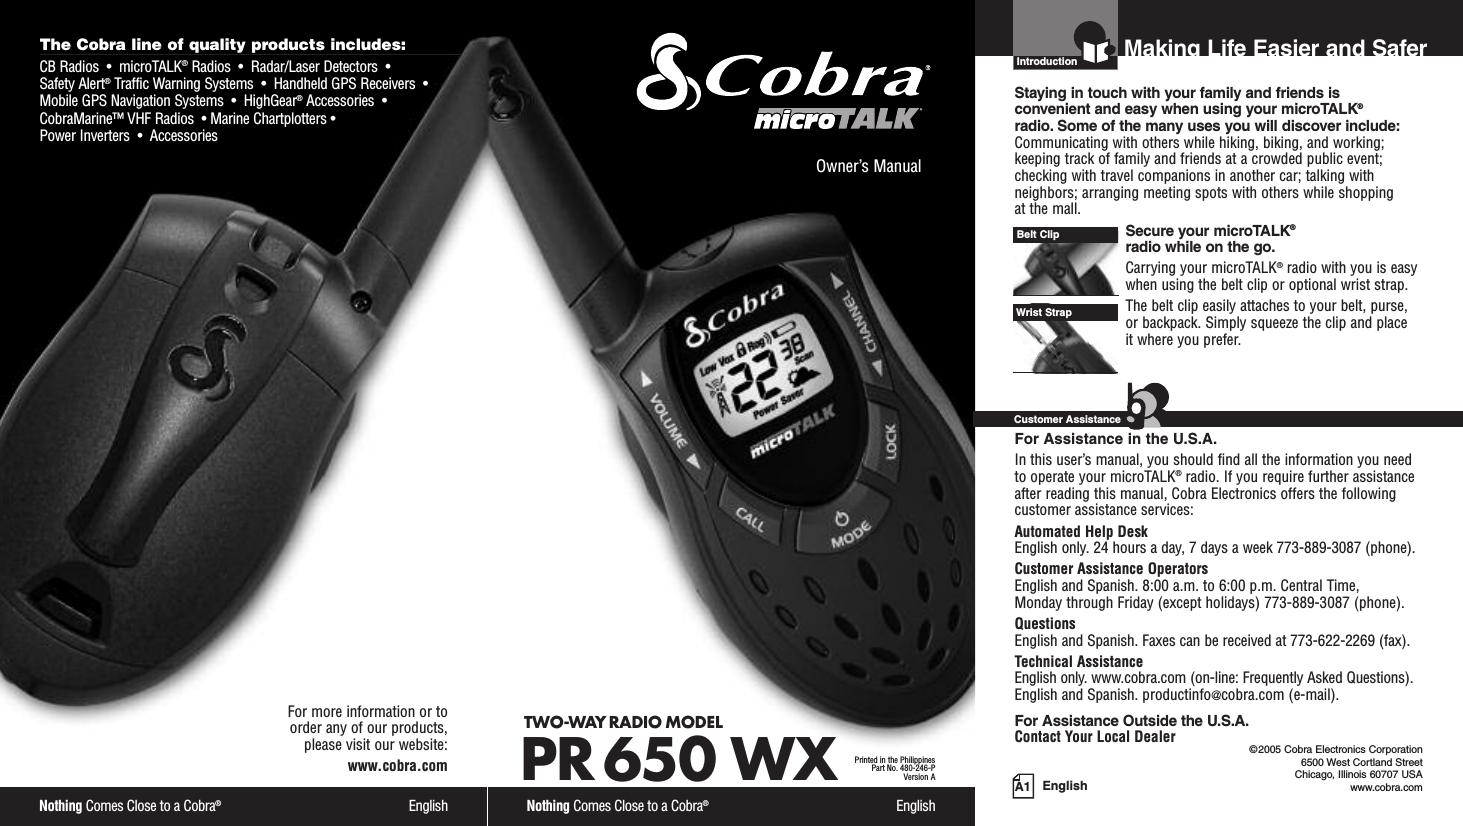 EnglishIntroduction©2005 Cobra Electronics Corporation6500 West Cortland StreetChicago, Illinois 60707 USAwww.cobra.comMaking Life Easier and SaferStaying in touch with your family and friends is convenient and easy when using your microTALK®radio. Some of the many uses you will discover include:Communicating with others while hiking, biking, and working;keeping track of family and friends at a crowded public event;checking with travel companions in another car; talking withneighbors; arranging meeting spots with others while shopping at the mall.Secure your microTALK®radio while on the go.Carrying your microTALK®radio with you is easywhen using the belt clip or optional wrist strap. The belt clip easily attaches to your belt, purse, or backpack. Simply squeeze the clip and place it where you prefer.For Assistance in the U.S.A.In this user’s manual, you should find all the information you needto operate your microTALK®radio. If you require further assistanceafter reading this manual, Cobra Electronics offers the followingcustomer assistance services:Automated Help Desk English only. 24 hours a day, 7 days a week 773-889-3087 (phone). Customer Assistance OperatorsEnglish and Spanish. 8:00 a.m. to 6:00 p.m. Central Time, Monday through Friday (except holidays) 773-889-3087 (phone). QuestionsEnglish and Spanish. Faxes can be received at 773-622-2269 (fax). Technical AssistanceEnglish only. www.cobra.com (on-line: Frequently Asked Questions). English and Spanish. productinfo@cobra.com (e-mail).For Assistance Outside the U.S.A.Contact Your Local DealerBelt ClipCustomer AssistanceA1Owner’s ManualNothing Comes Close to a Cobra®EnglishTWO-WAY RADIO MODEL PR 650 WXPrinted in the PhilippinesPart No. 480-246-PVersion AThe Cobra line of quality products includes:CB Radios  •  microTALK®Radios  •  Radar/Laser Detectors  •Safety Alert®Traffic Warning Systems  •  Handheld GPS Receivers  •Mobile GPS Navigation Systems  •  HighGear®Accessories  •CobraMarine™ VHF Radios  • Marine Chartplotters •Power Inverters  •  AccessoriesNothing Comes Close to a Cobra®EnglishFor more information or to order any of our products, please visit our website:www.cobra.comWrist Strap